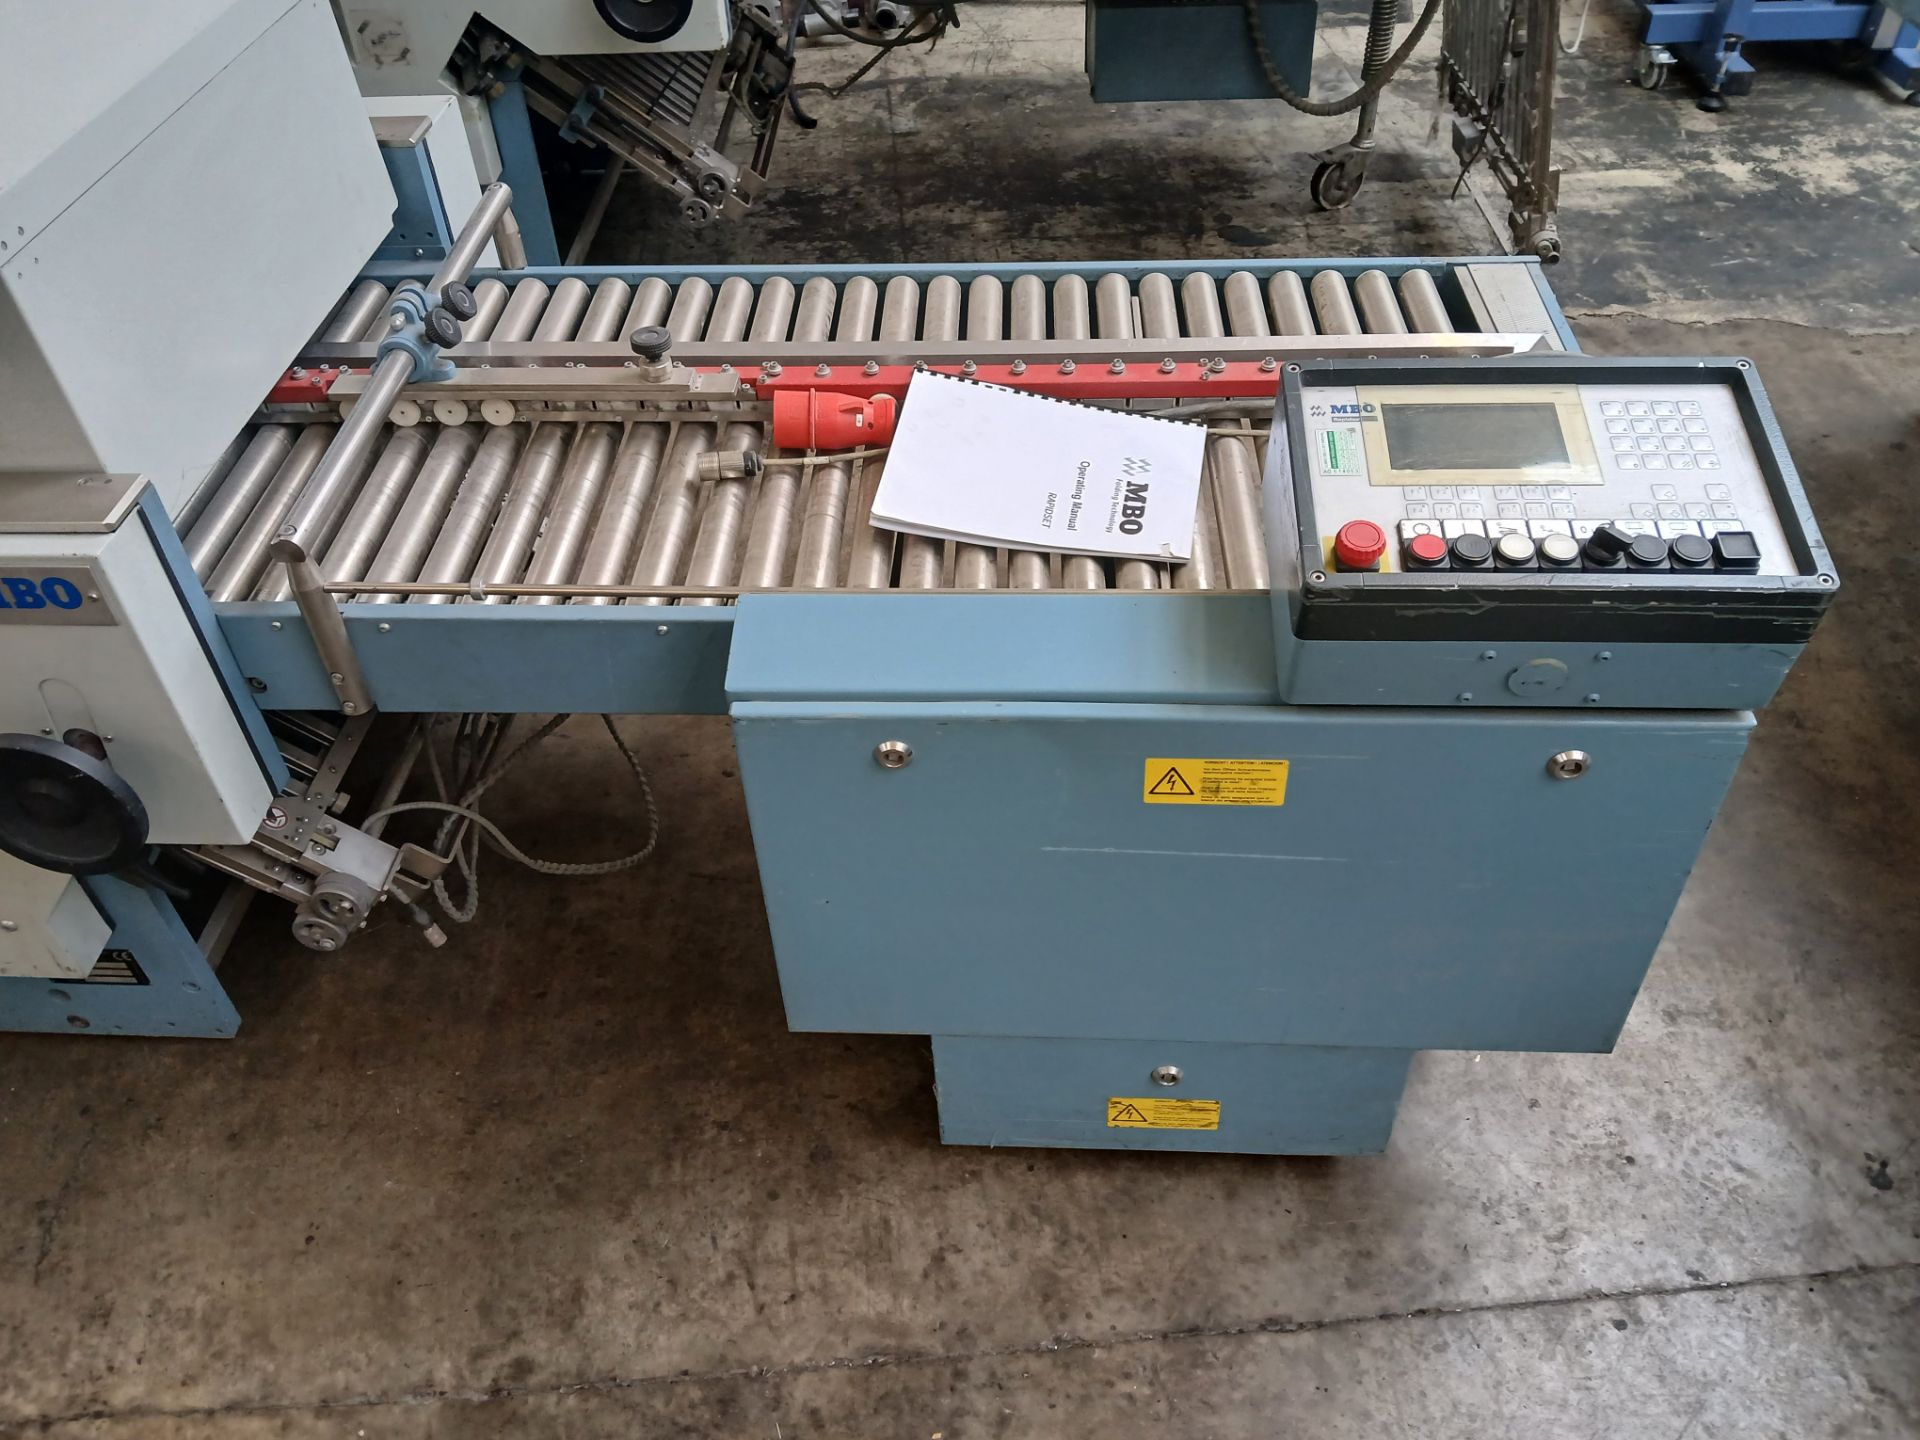 MBO T700 – 3-56/4 3rd folding unit. Serial Number 0031975, 415V with Rapidset control unit. A Risk - Bild 2 aus 7